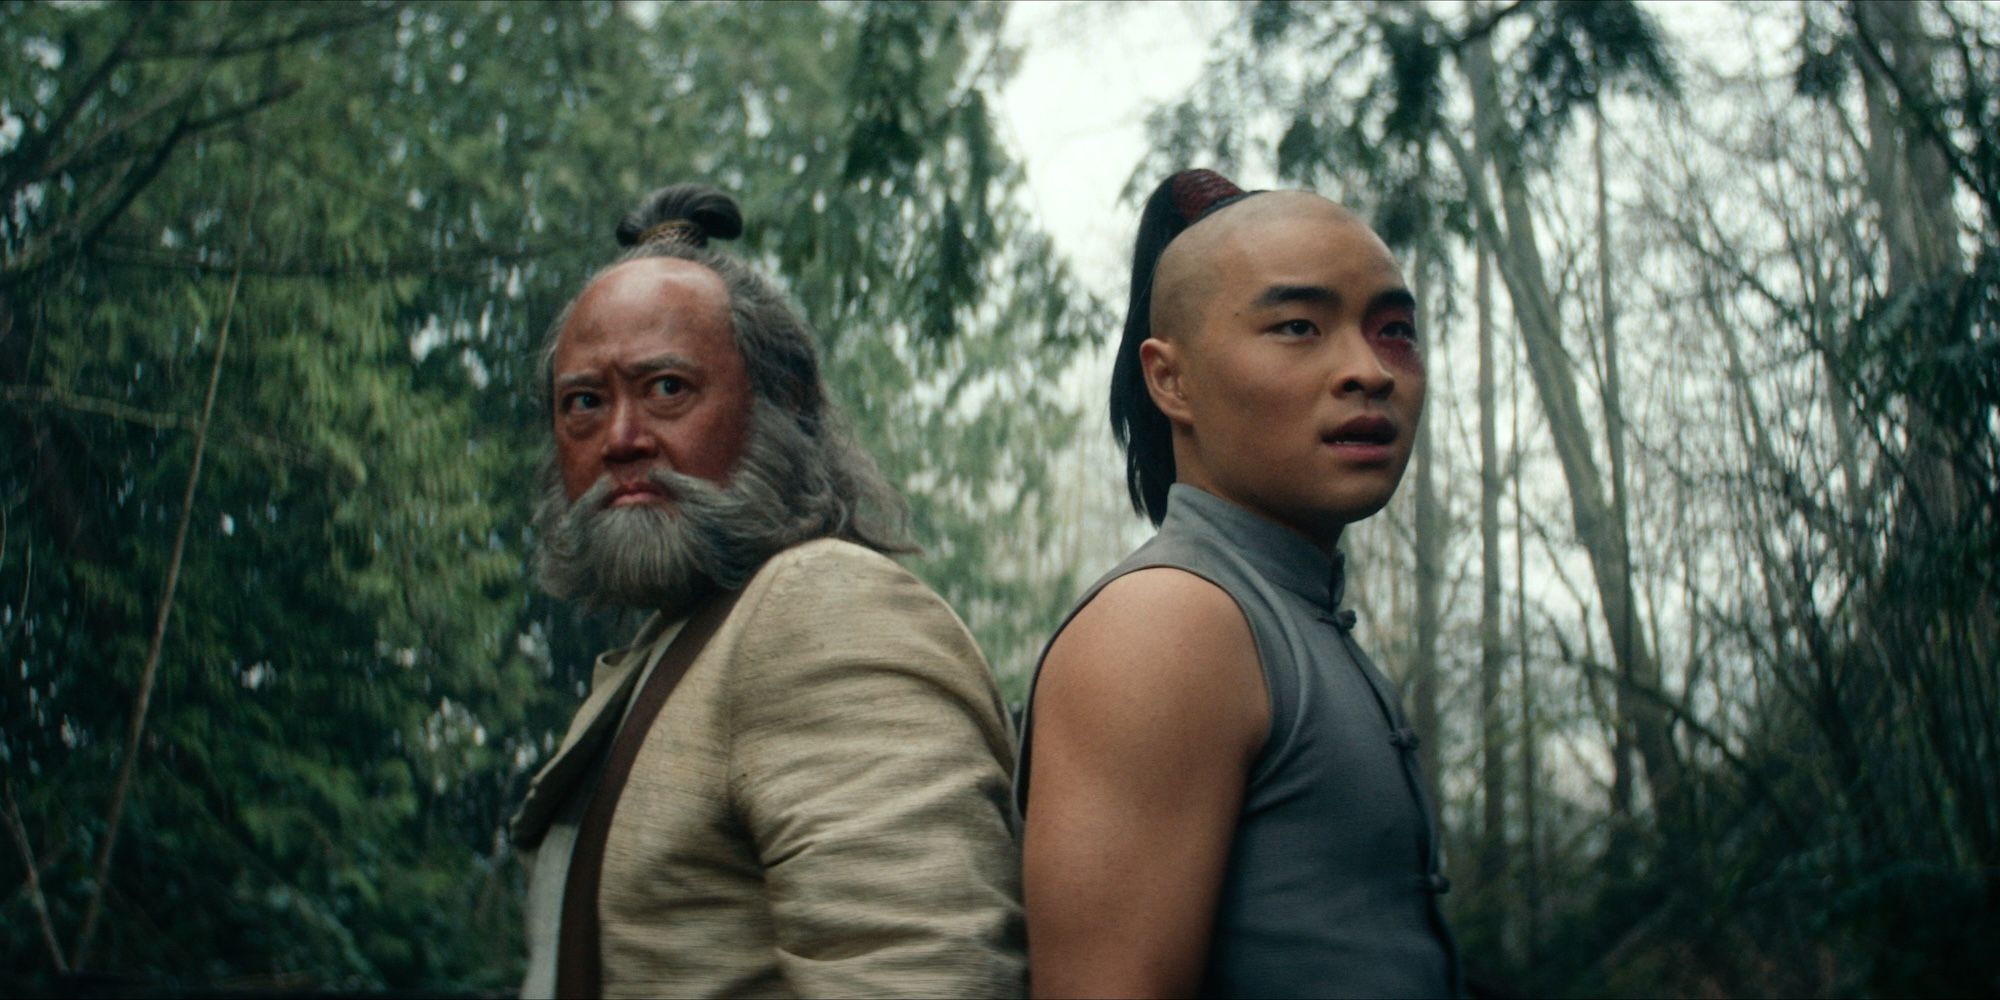 Uncle Iroh and Zuko stand back to back ready to fight in Avatar The Last Airbender series